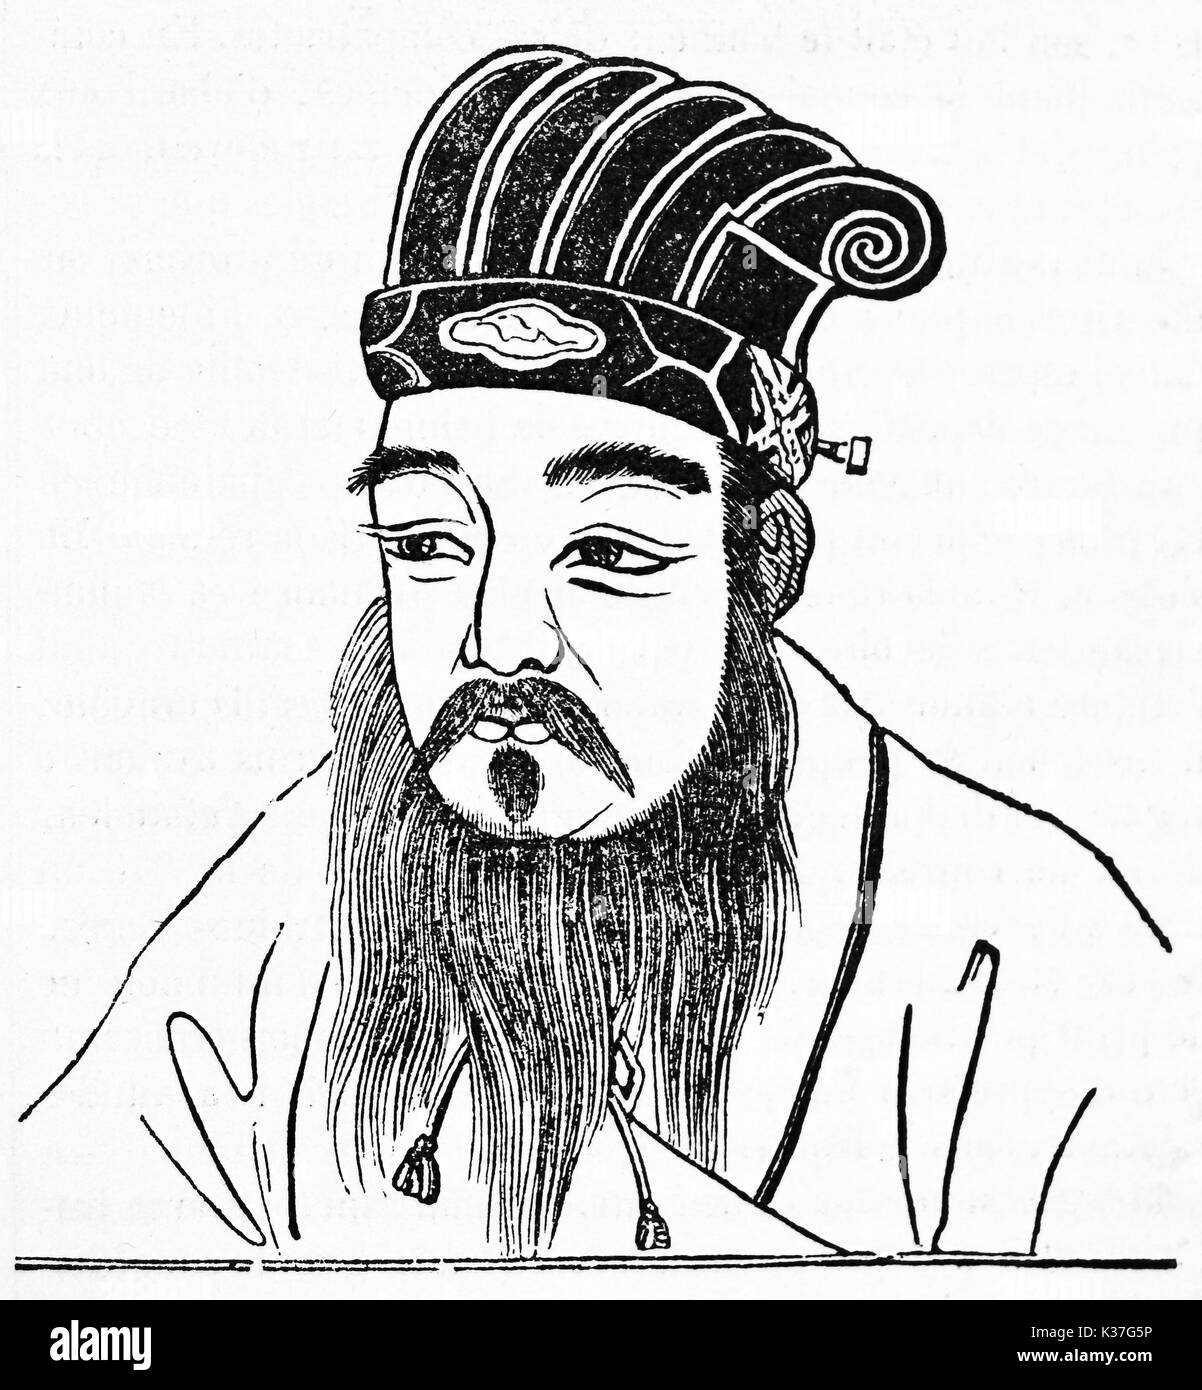 Old engraved portrait of Mencius (372 BC – 289 BC), Chinese Confucian philosopher. Old Illustration by unidentified author, published on Magasin Pittoresque, Paris, 1834. Stock Photo